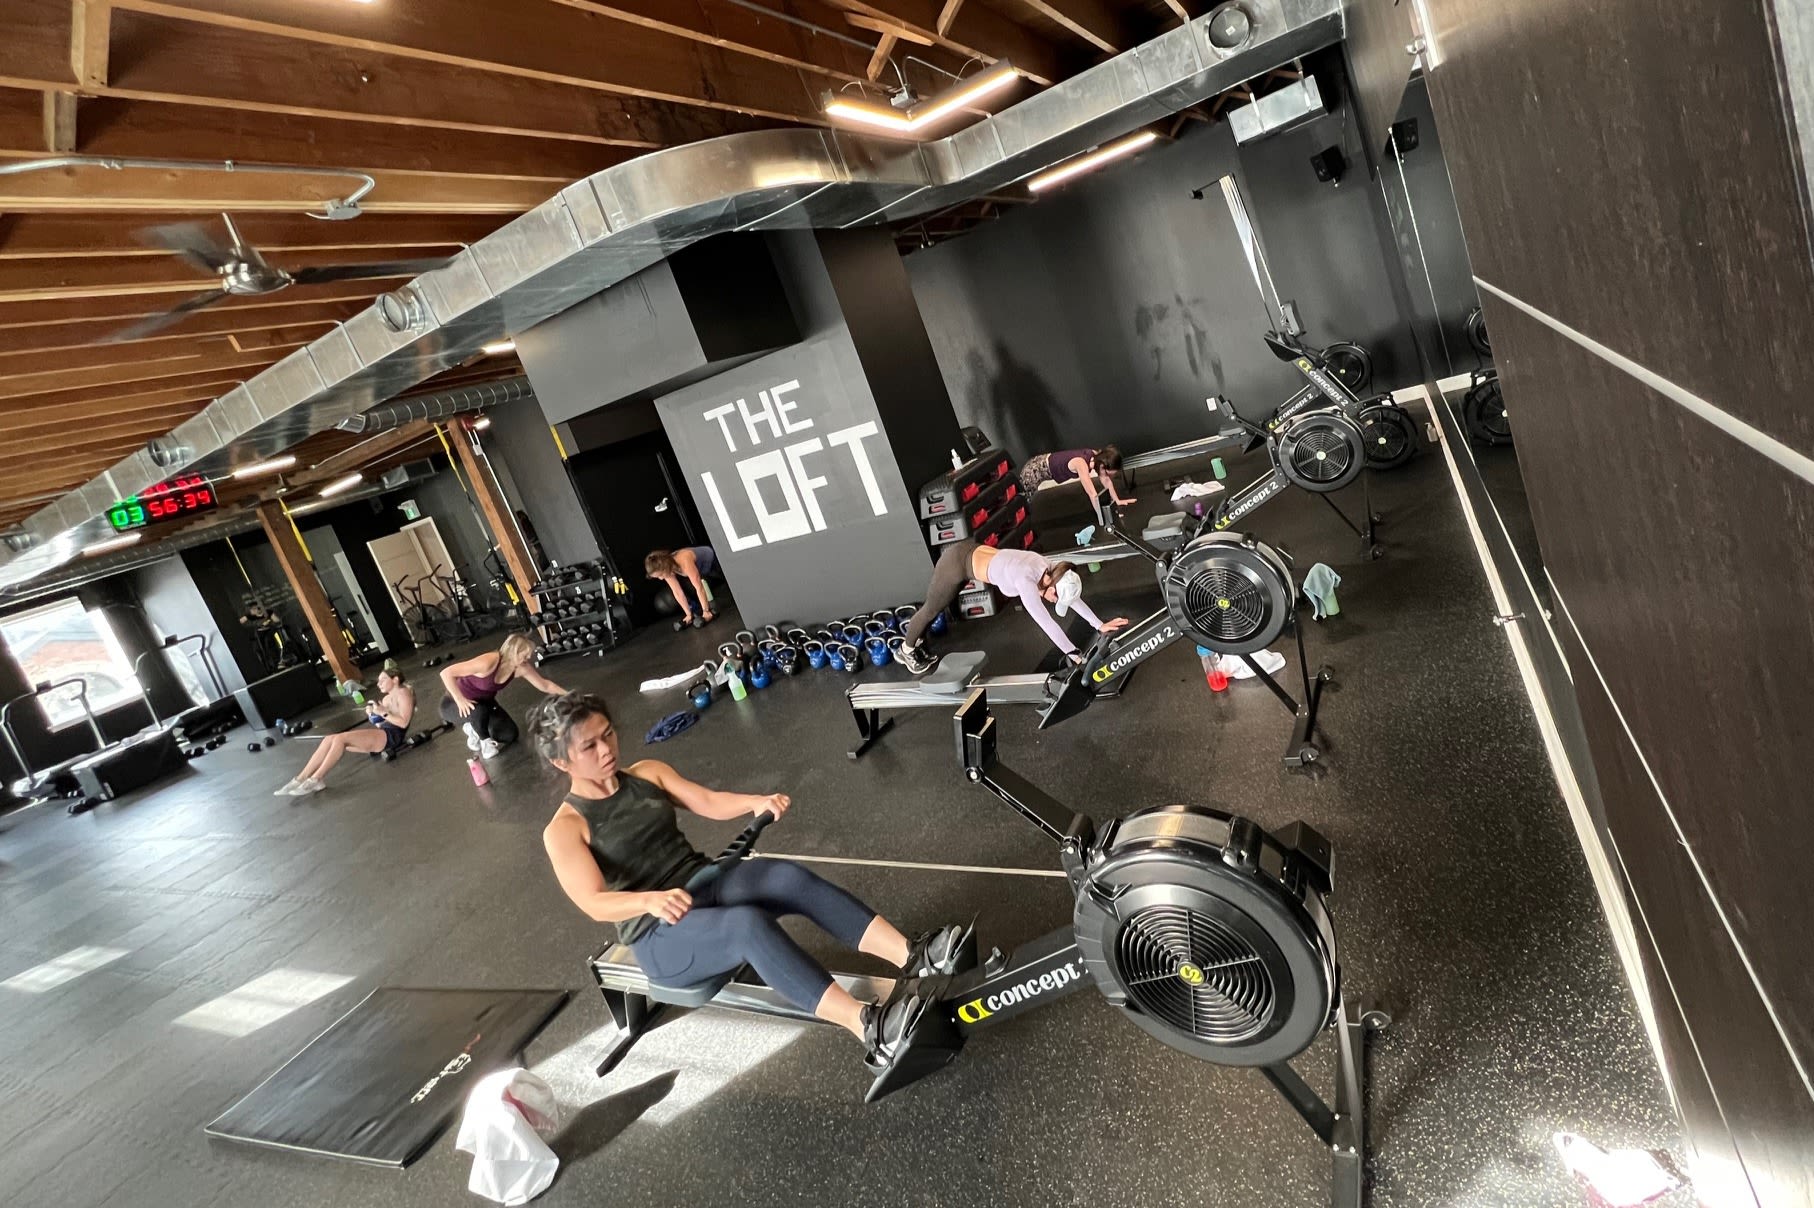 Womens Fitness Clubs of Canada - Promenade Mall: Read Reviews and Book  Classes on ClassPass